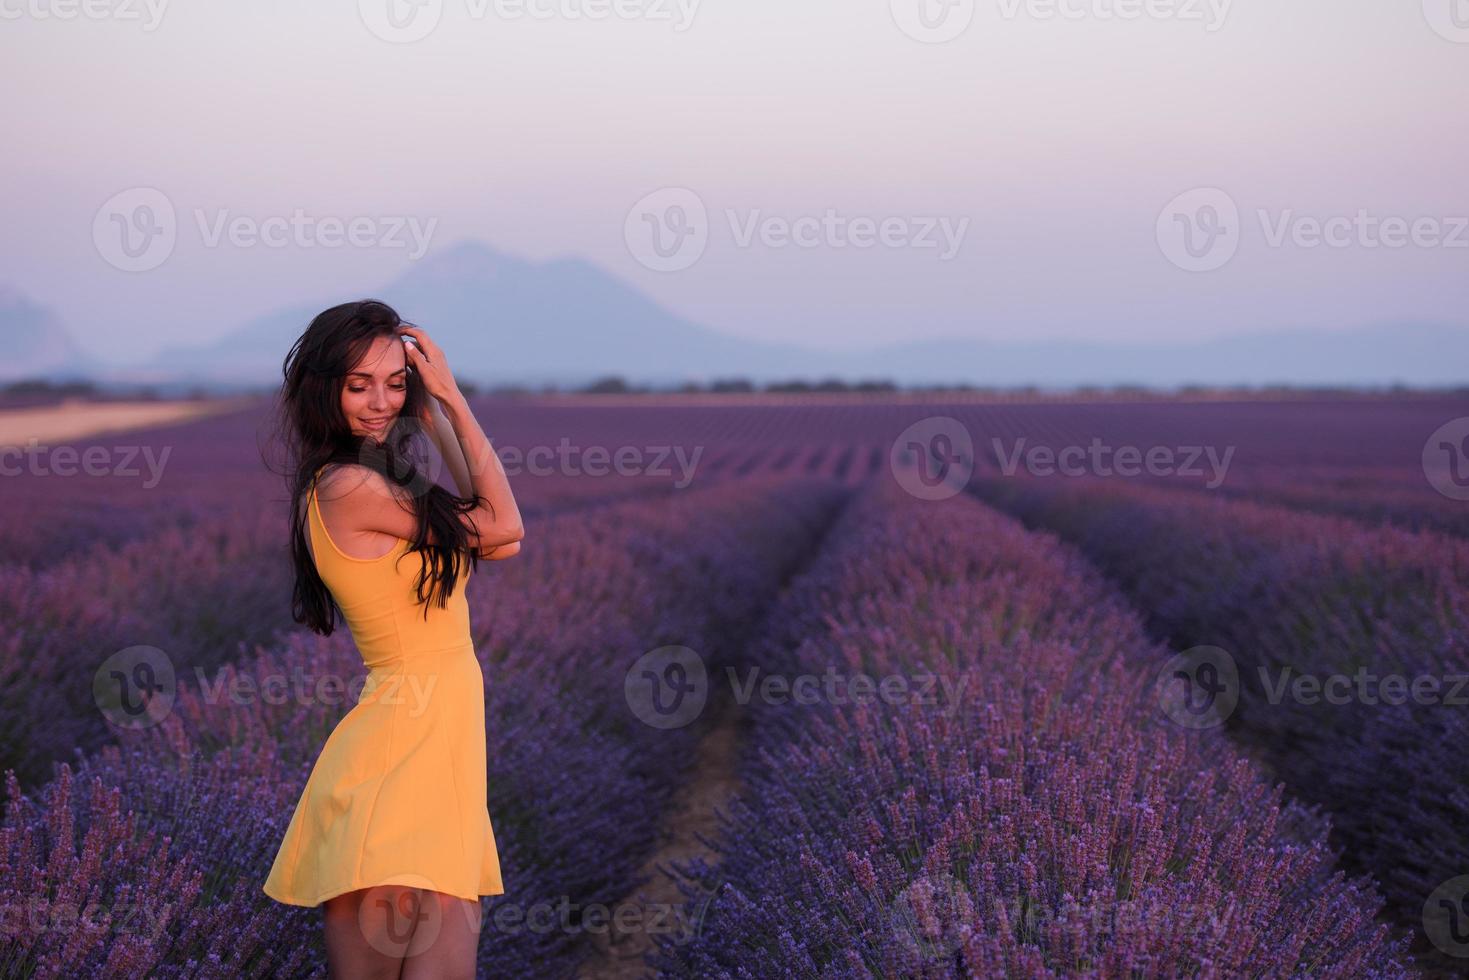 woman in yellow dress at lavender field photo